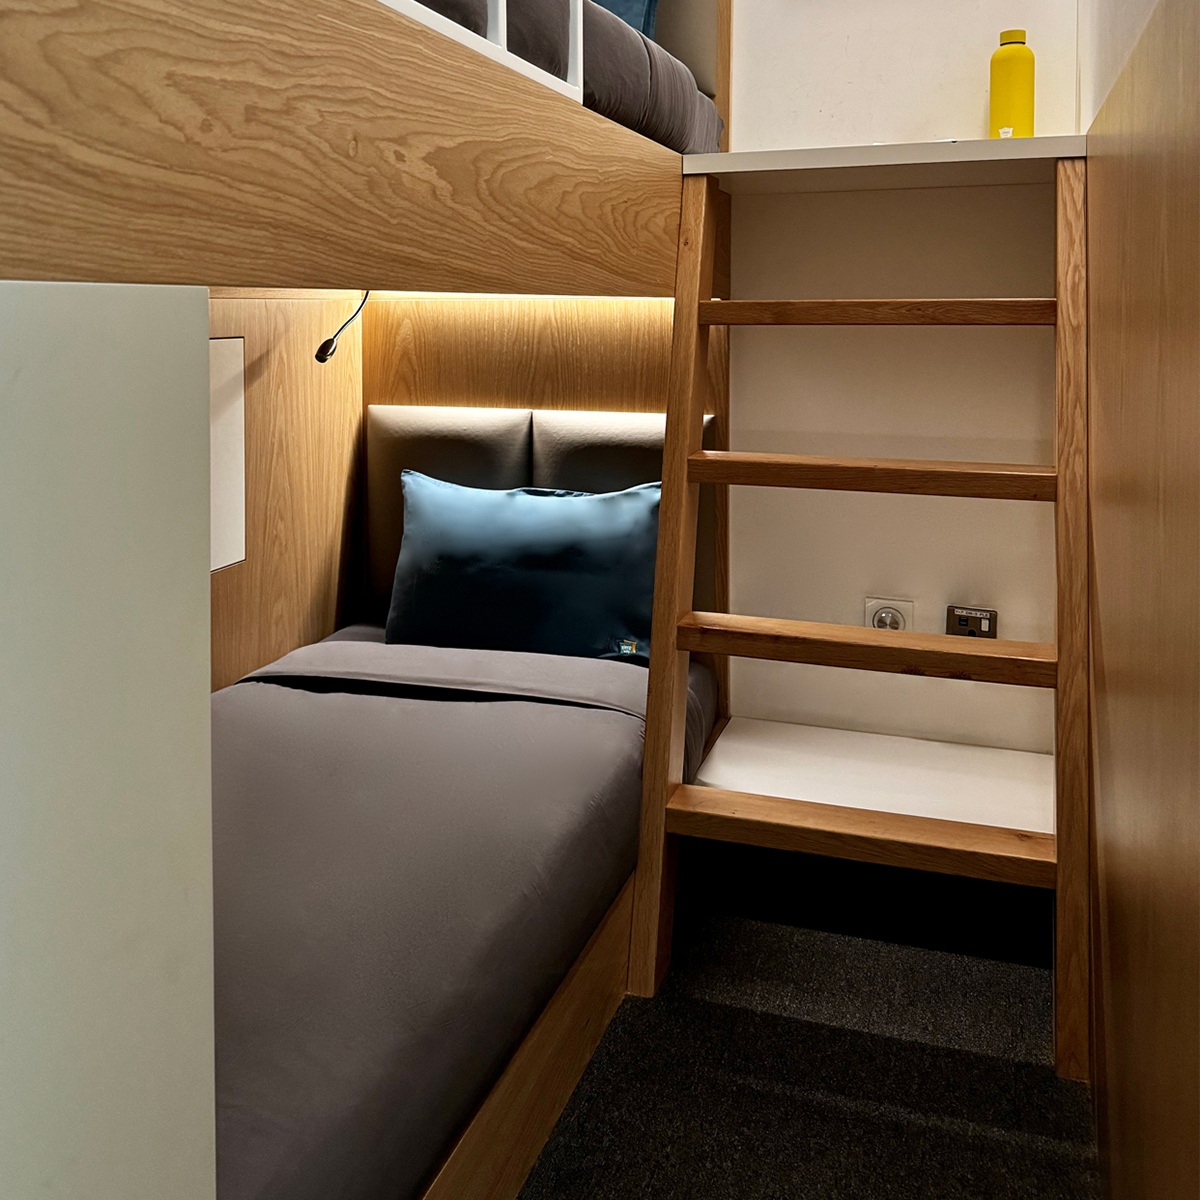 sleep 'n fly, Dubai Airport, bunk cabin room with bunk bed and stairs